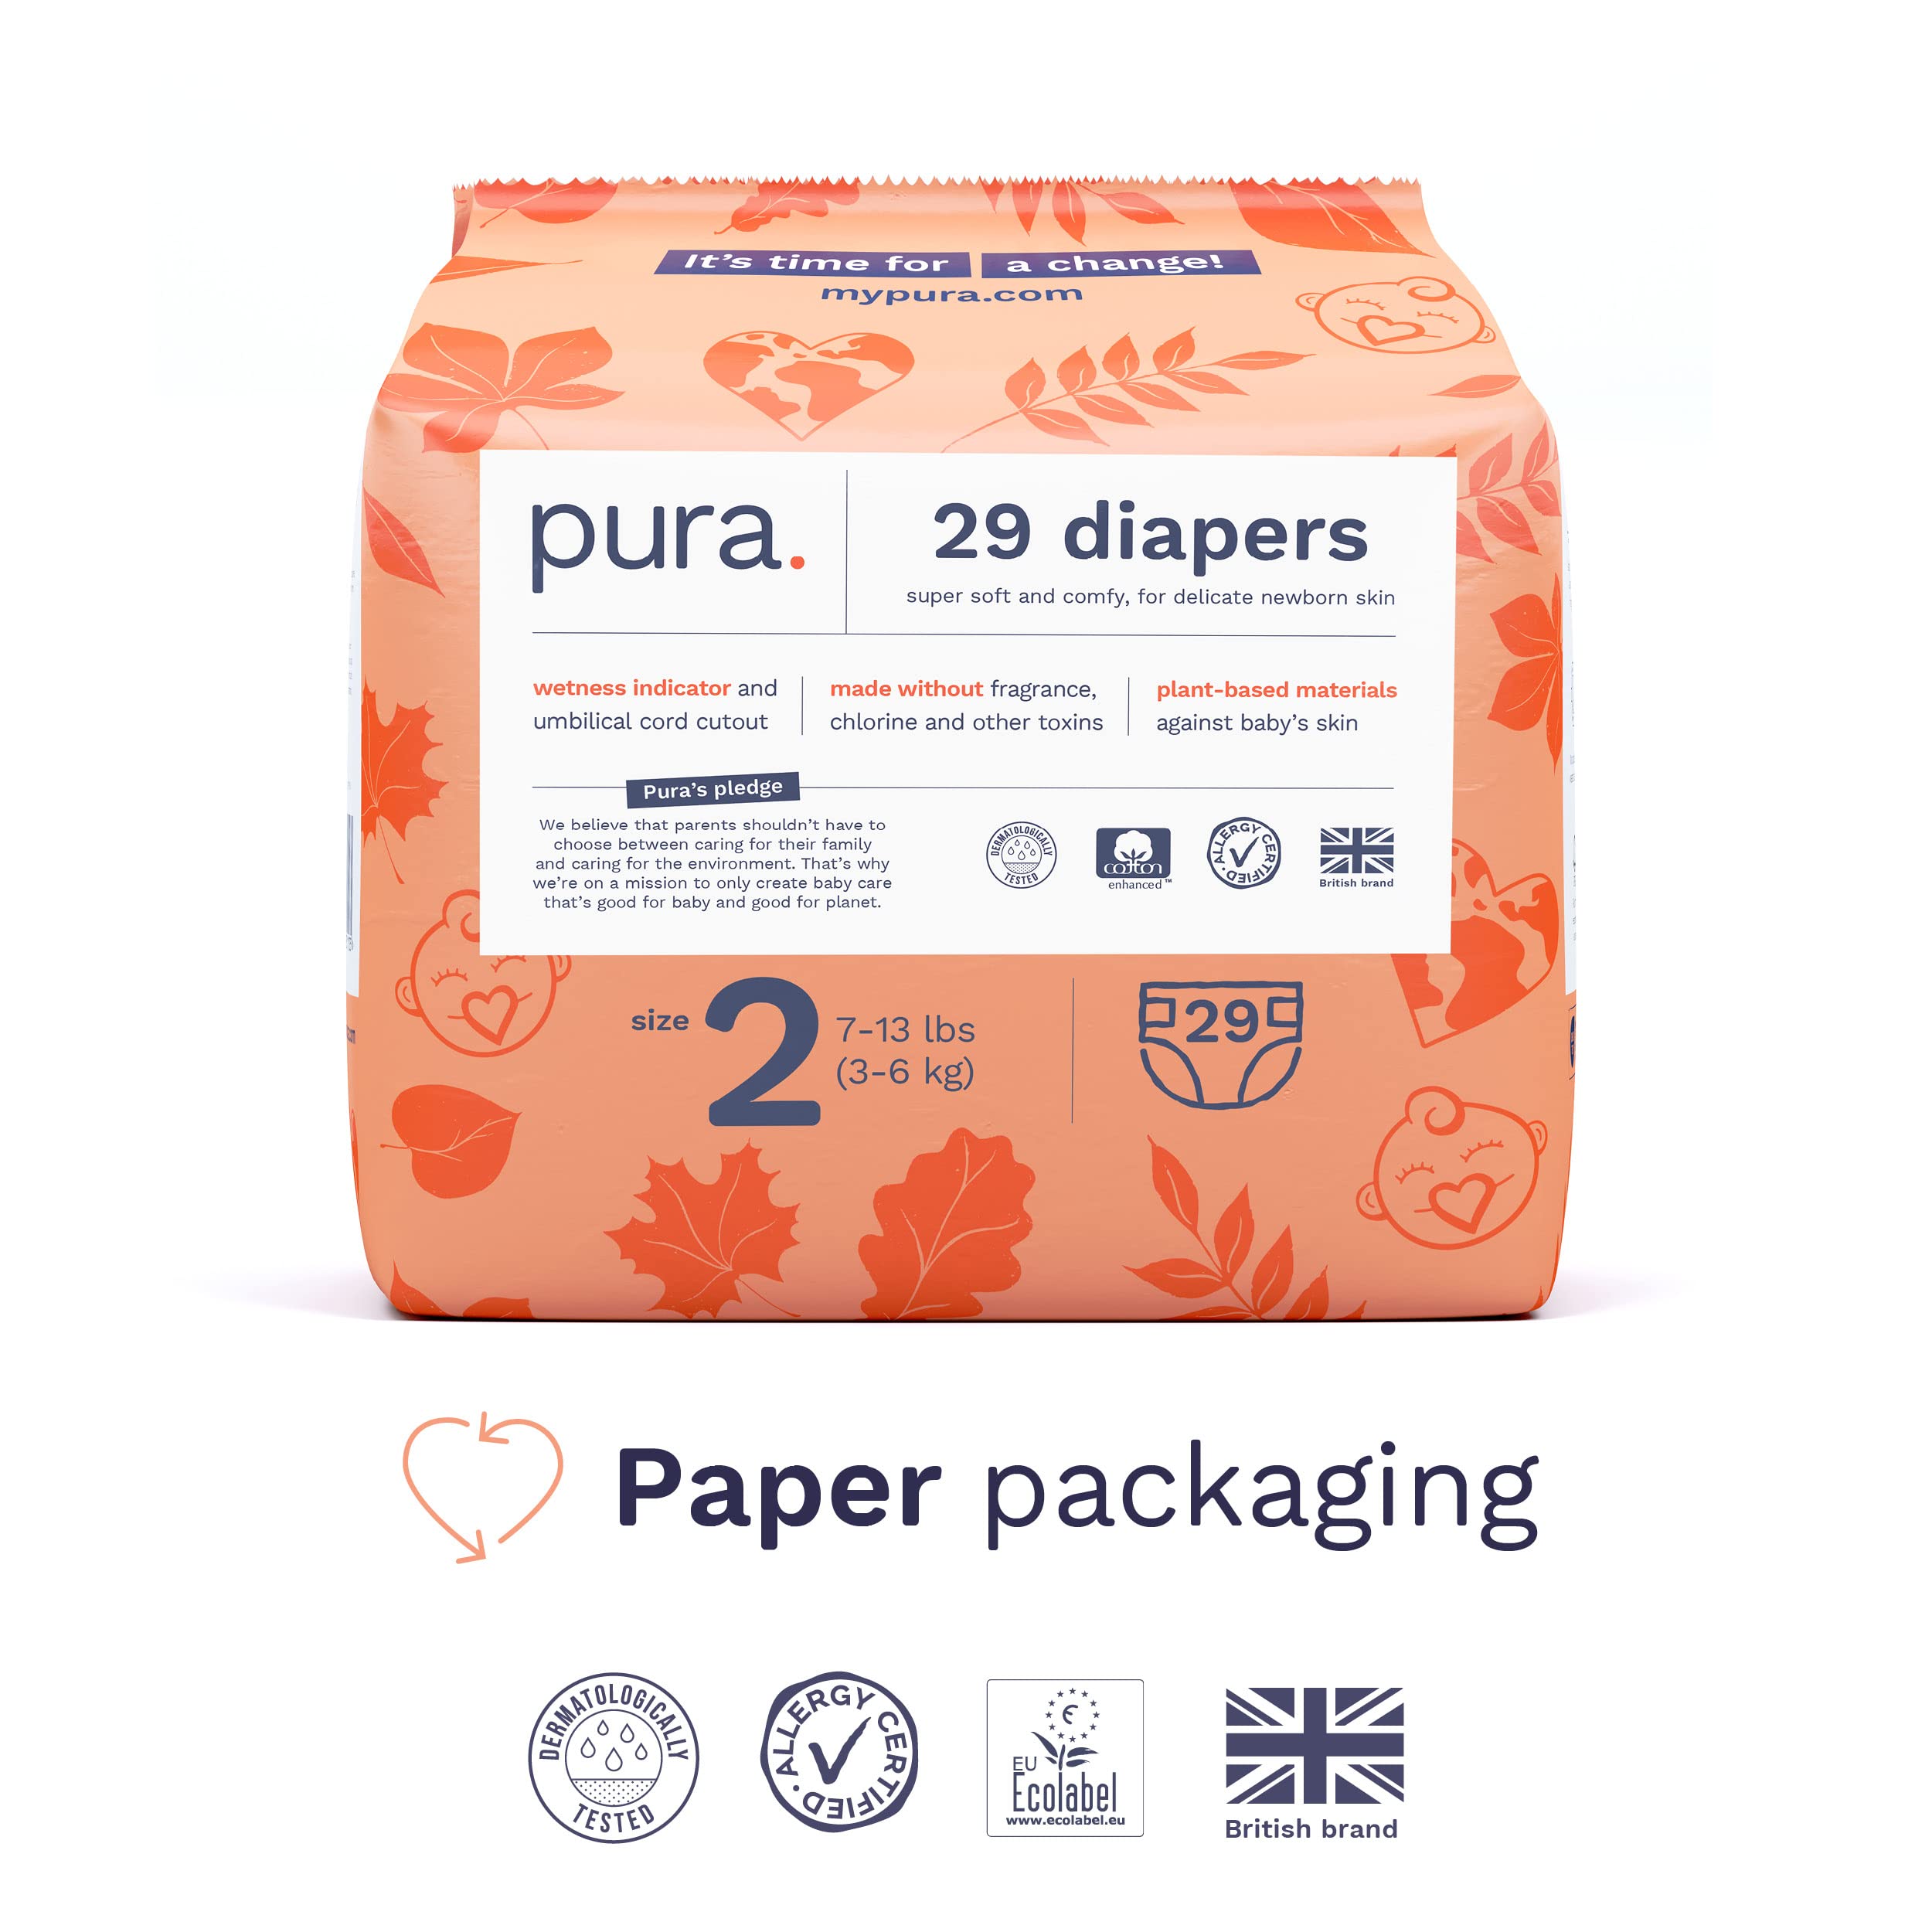 Pura Size 2 Eco-Friendly Diapers, Hypoallergenic, Soft Organic Cotton Comfort, Sustainable, Wetness Indicator, Allergy-Certified, Recyclable Packaging, 174 Count